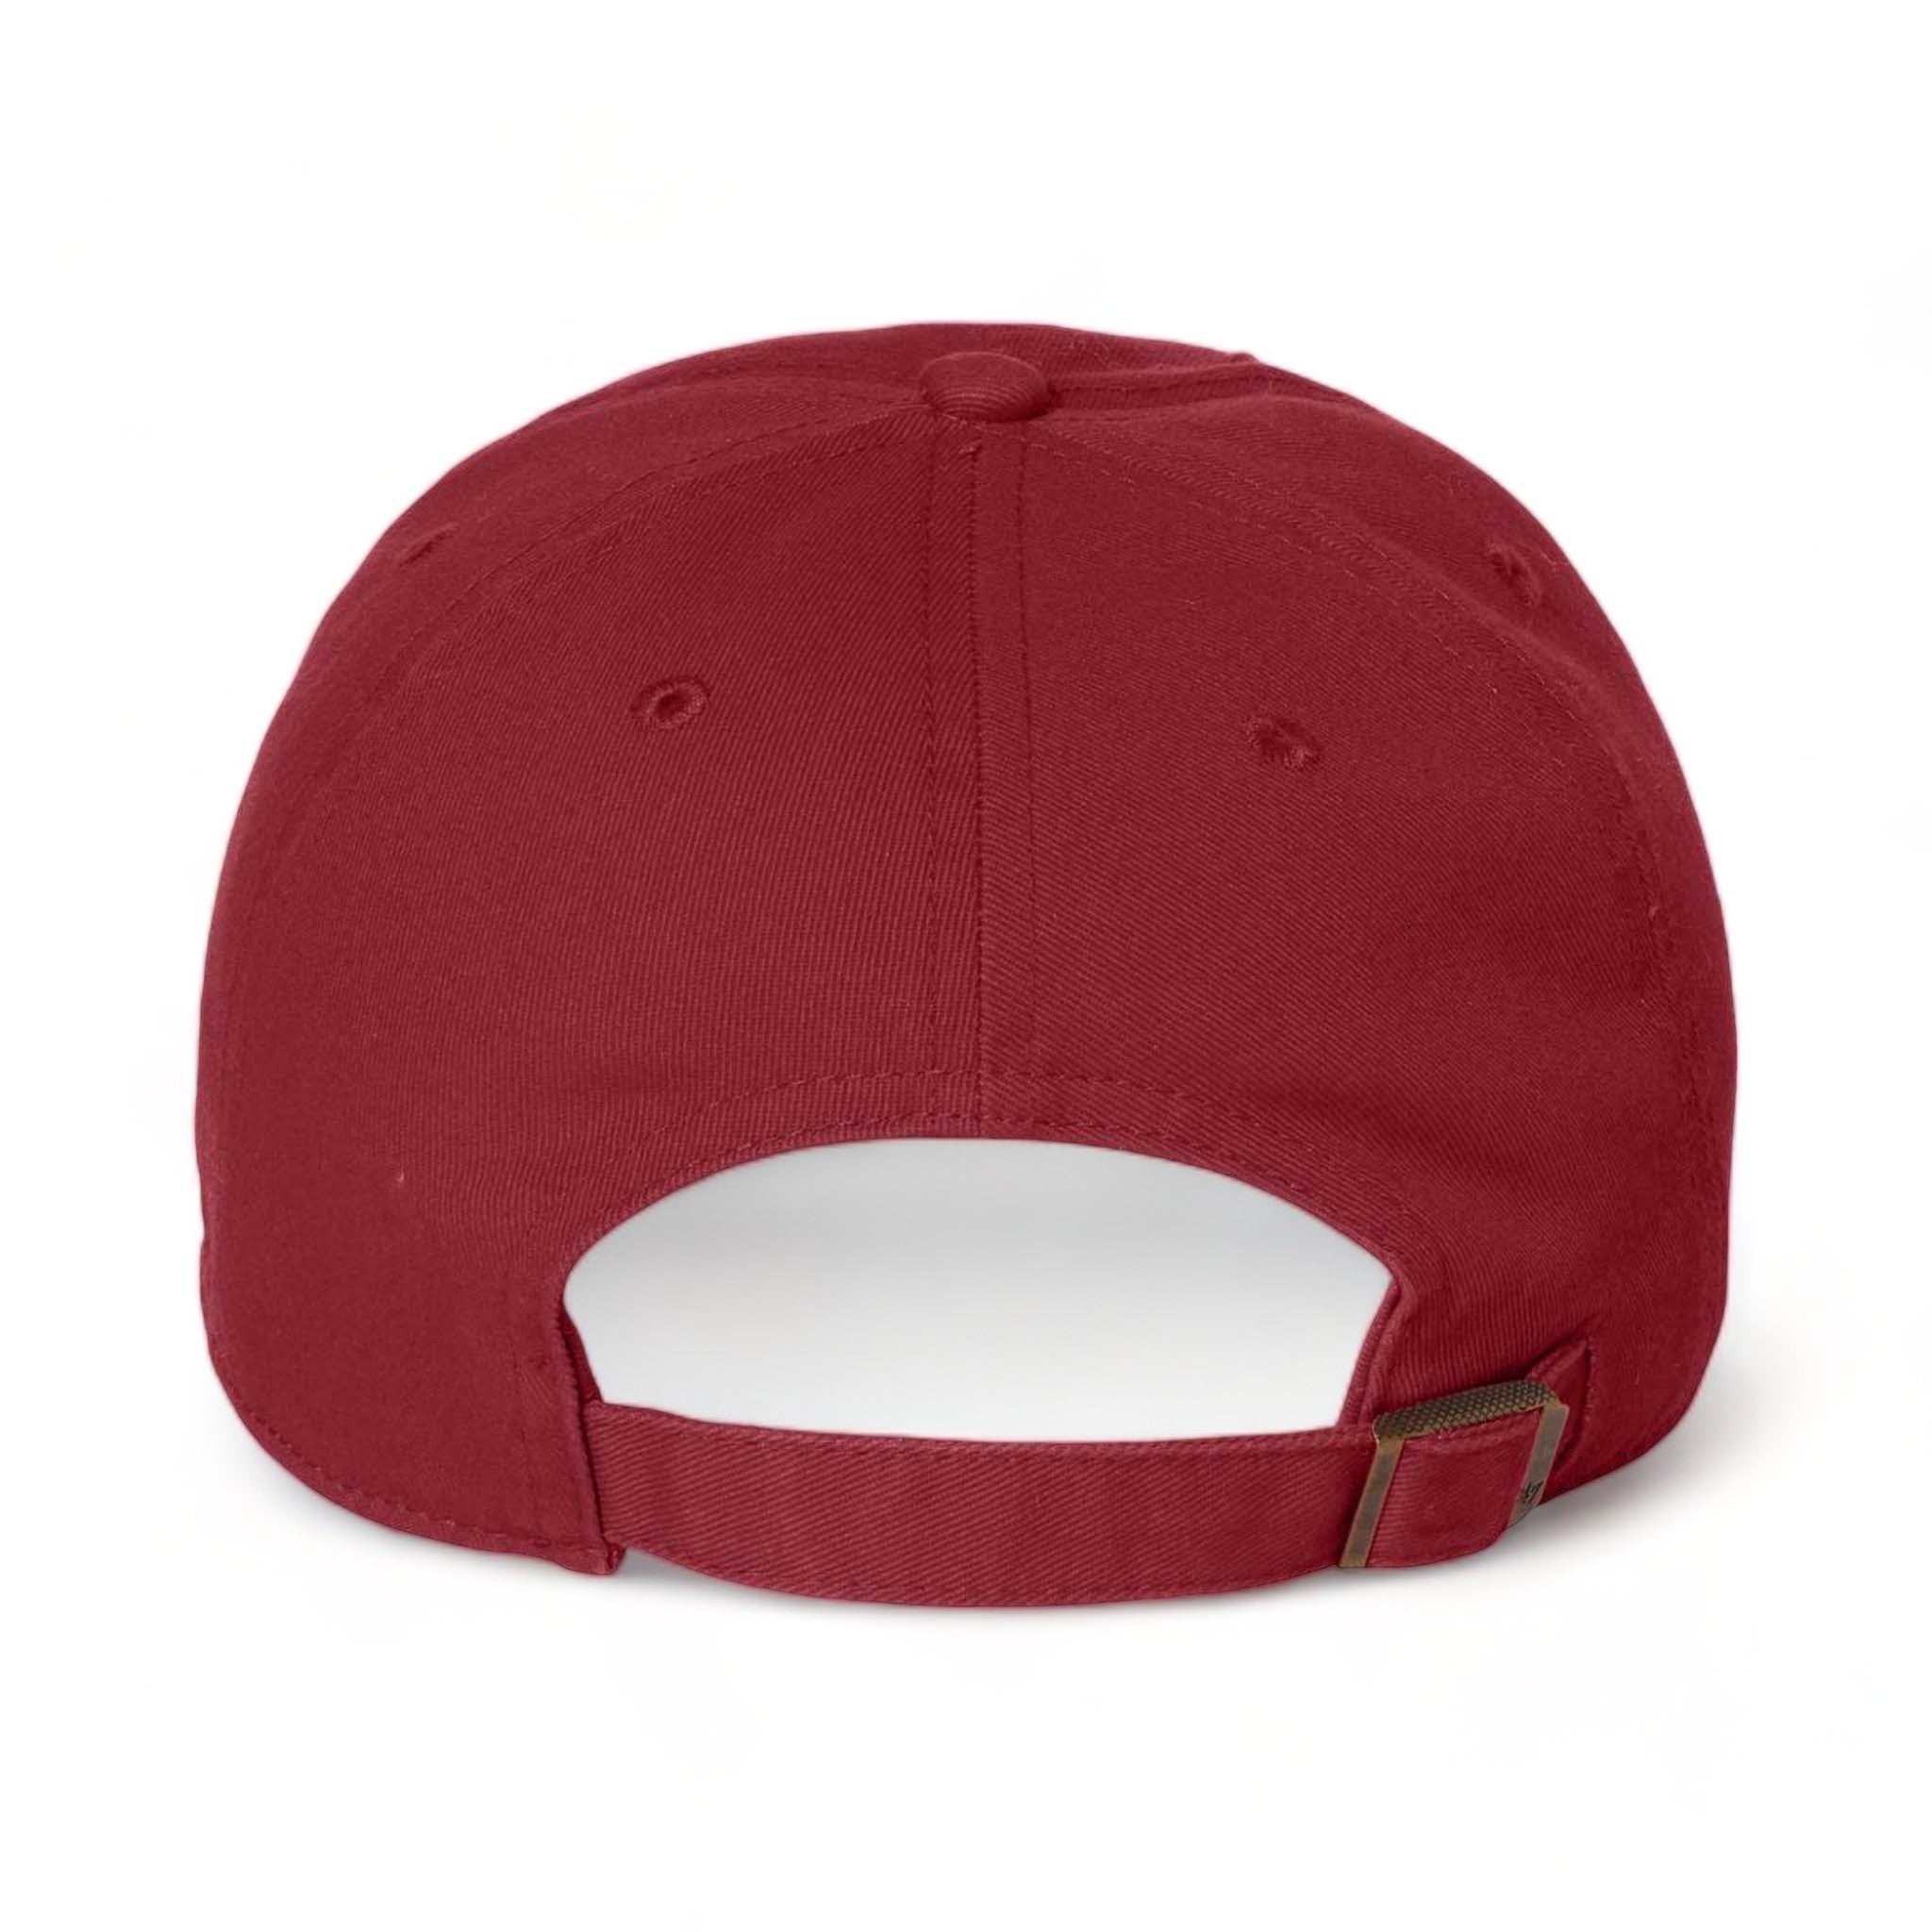 Back view of 47 Brand 4700 custom hat in cardinal